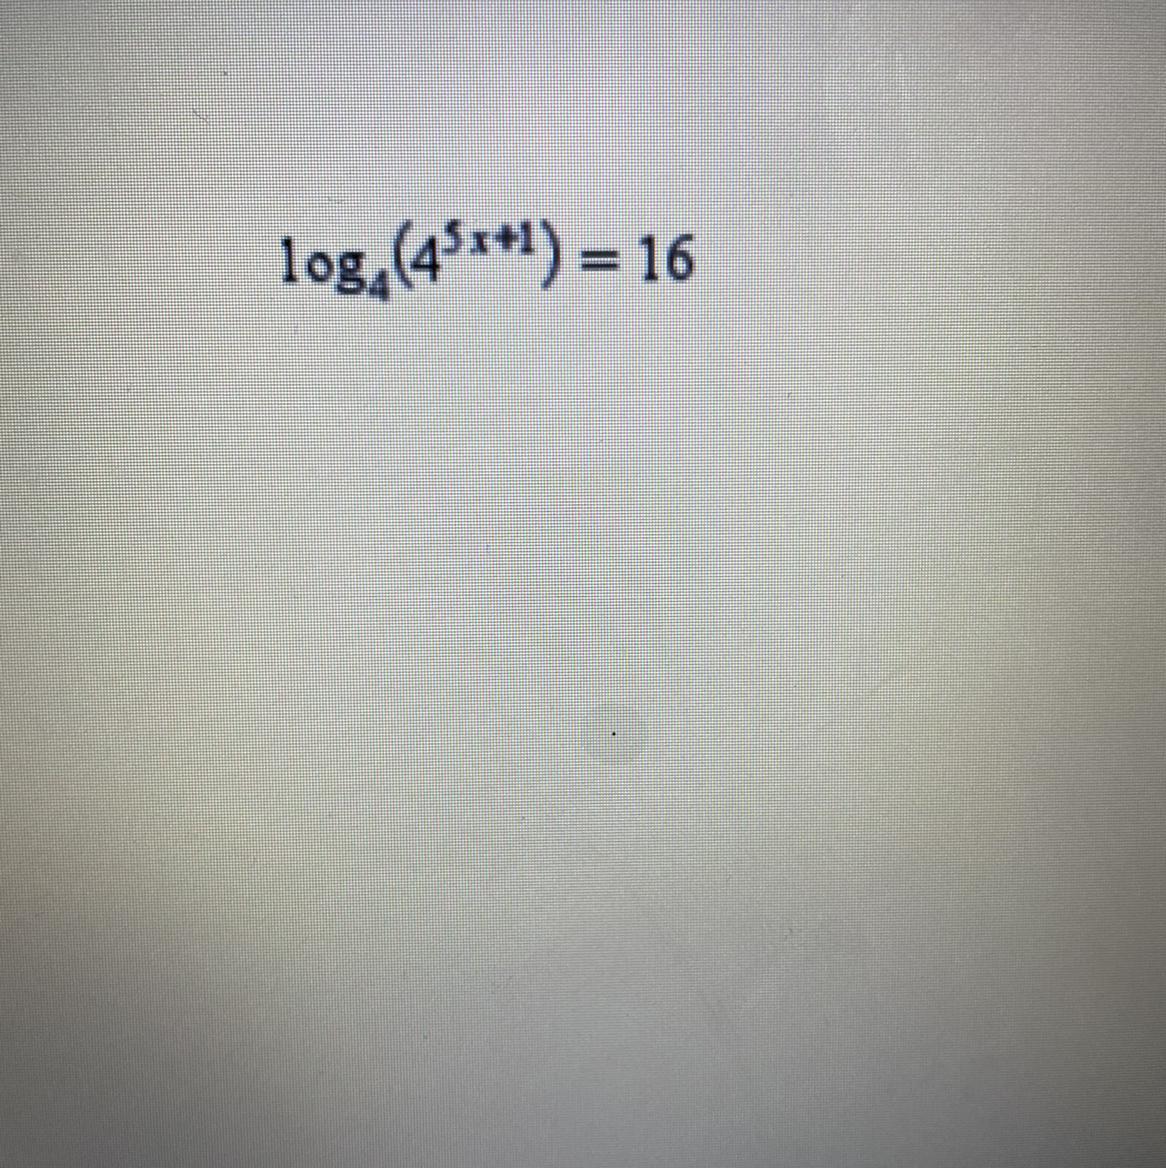 What Value Of X Will Make The Following Equation True? Log4(4^5x+1)=167/501/53(Picture For Clarification)